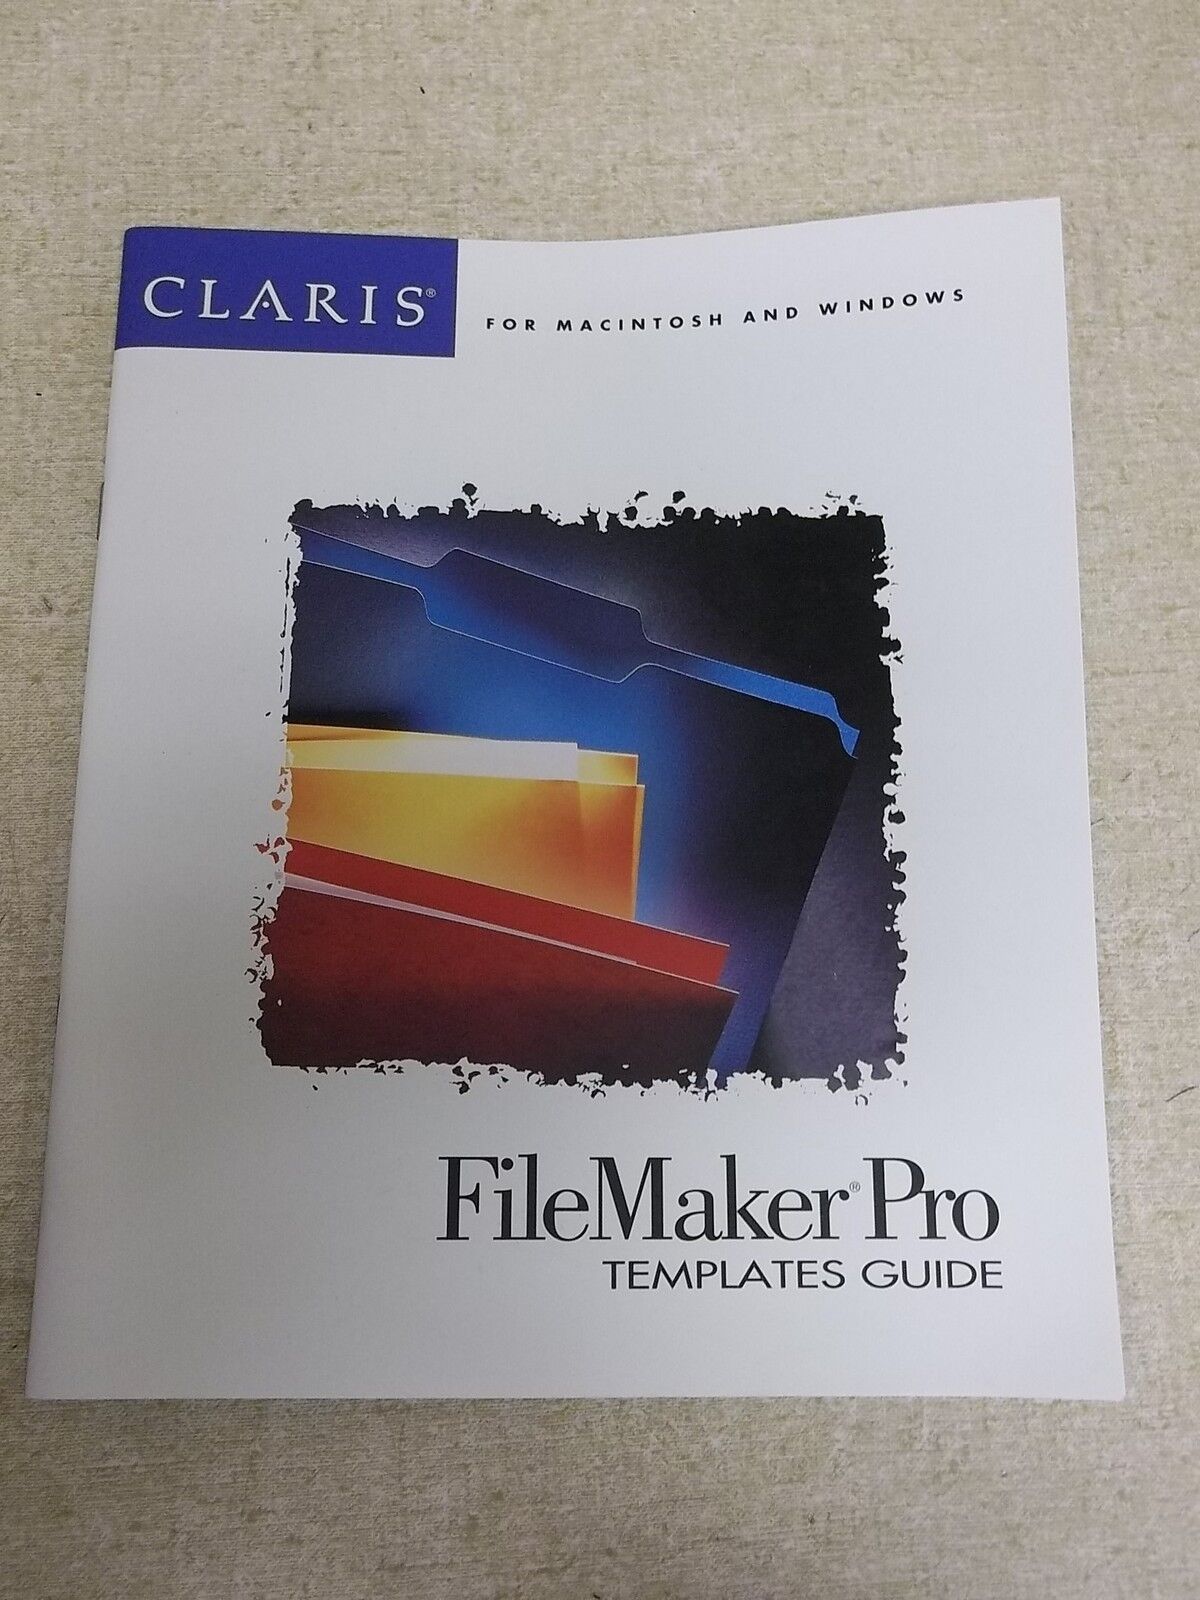 File Maker Pro Templates Guide U92604-001A *FREE SHPPING*